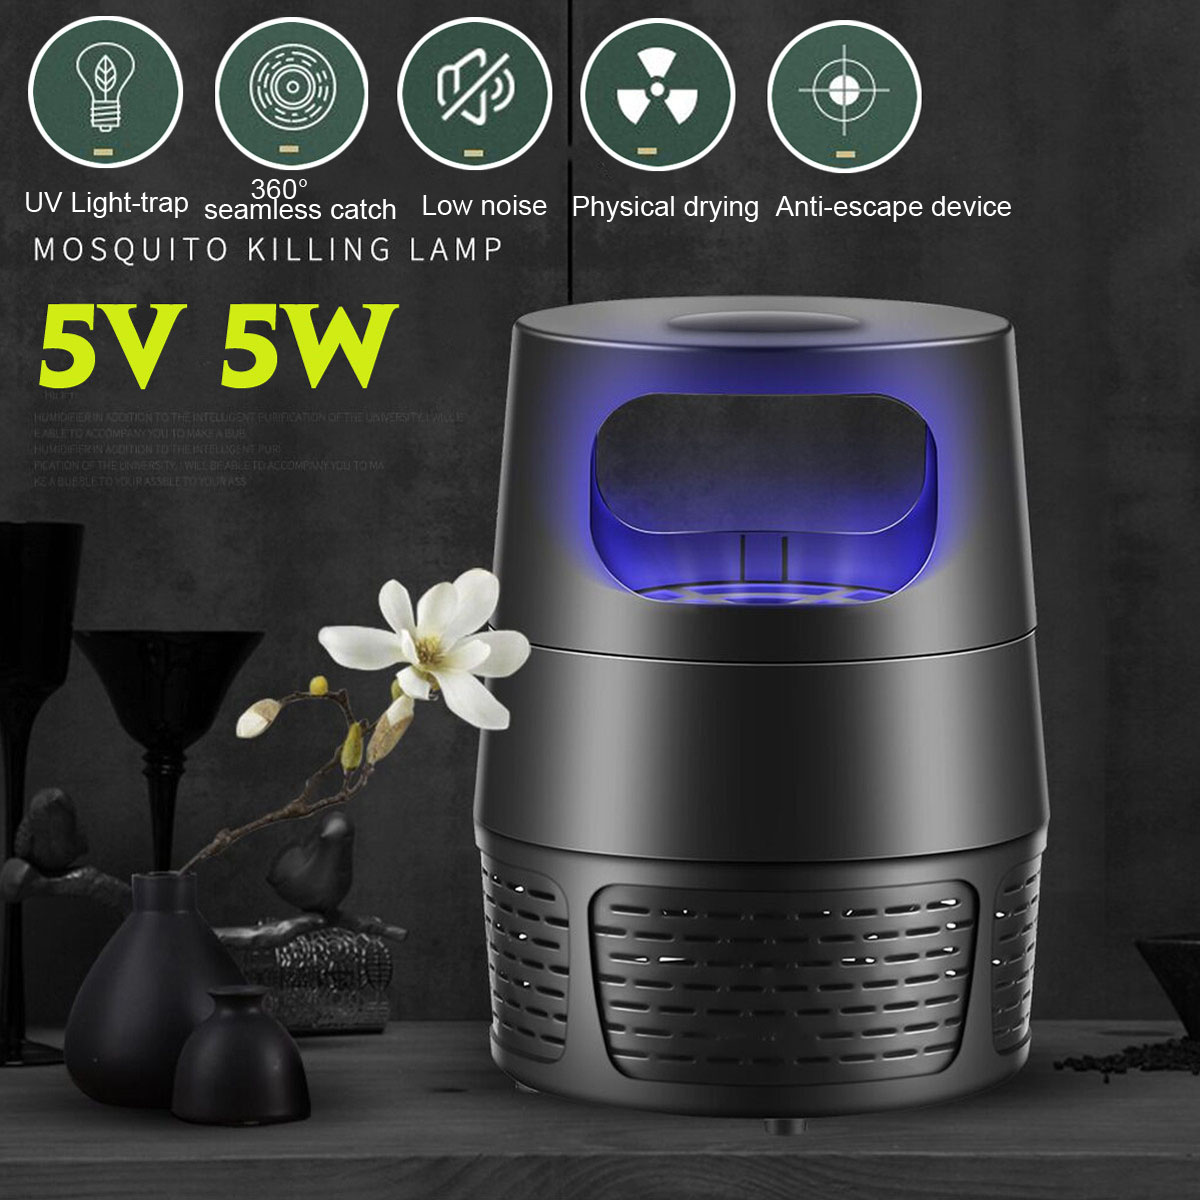 5V-USB-LED-Mosquito-Killer-Lamp-Insect-Fly-Bug-Zapper-Trap-Pest-Control-UV-Light-Mosquito-Dispeller-1445790-2